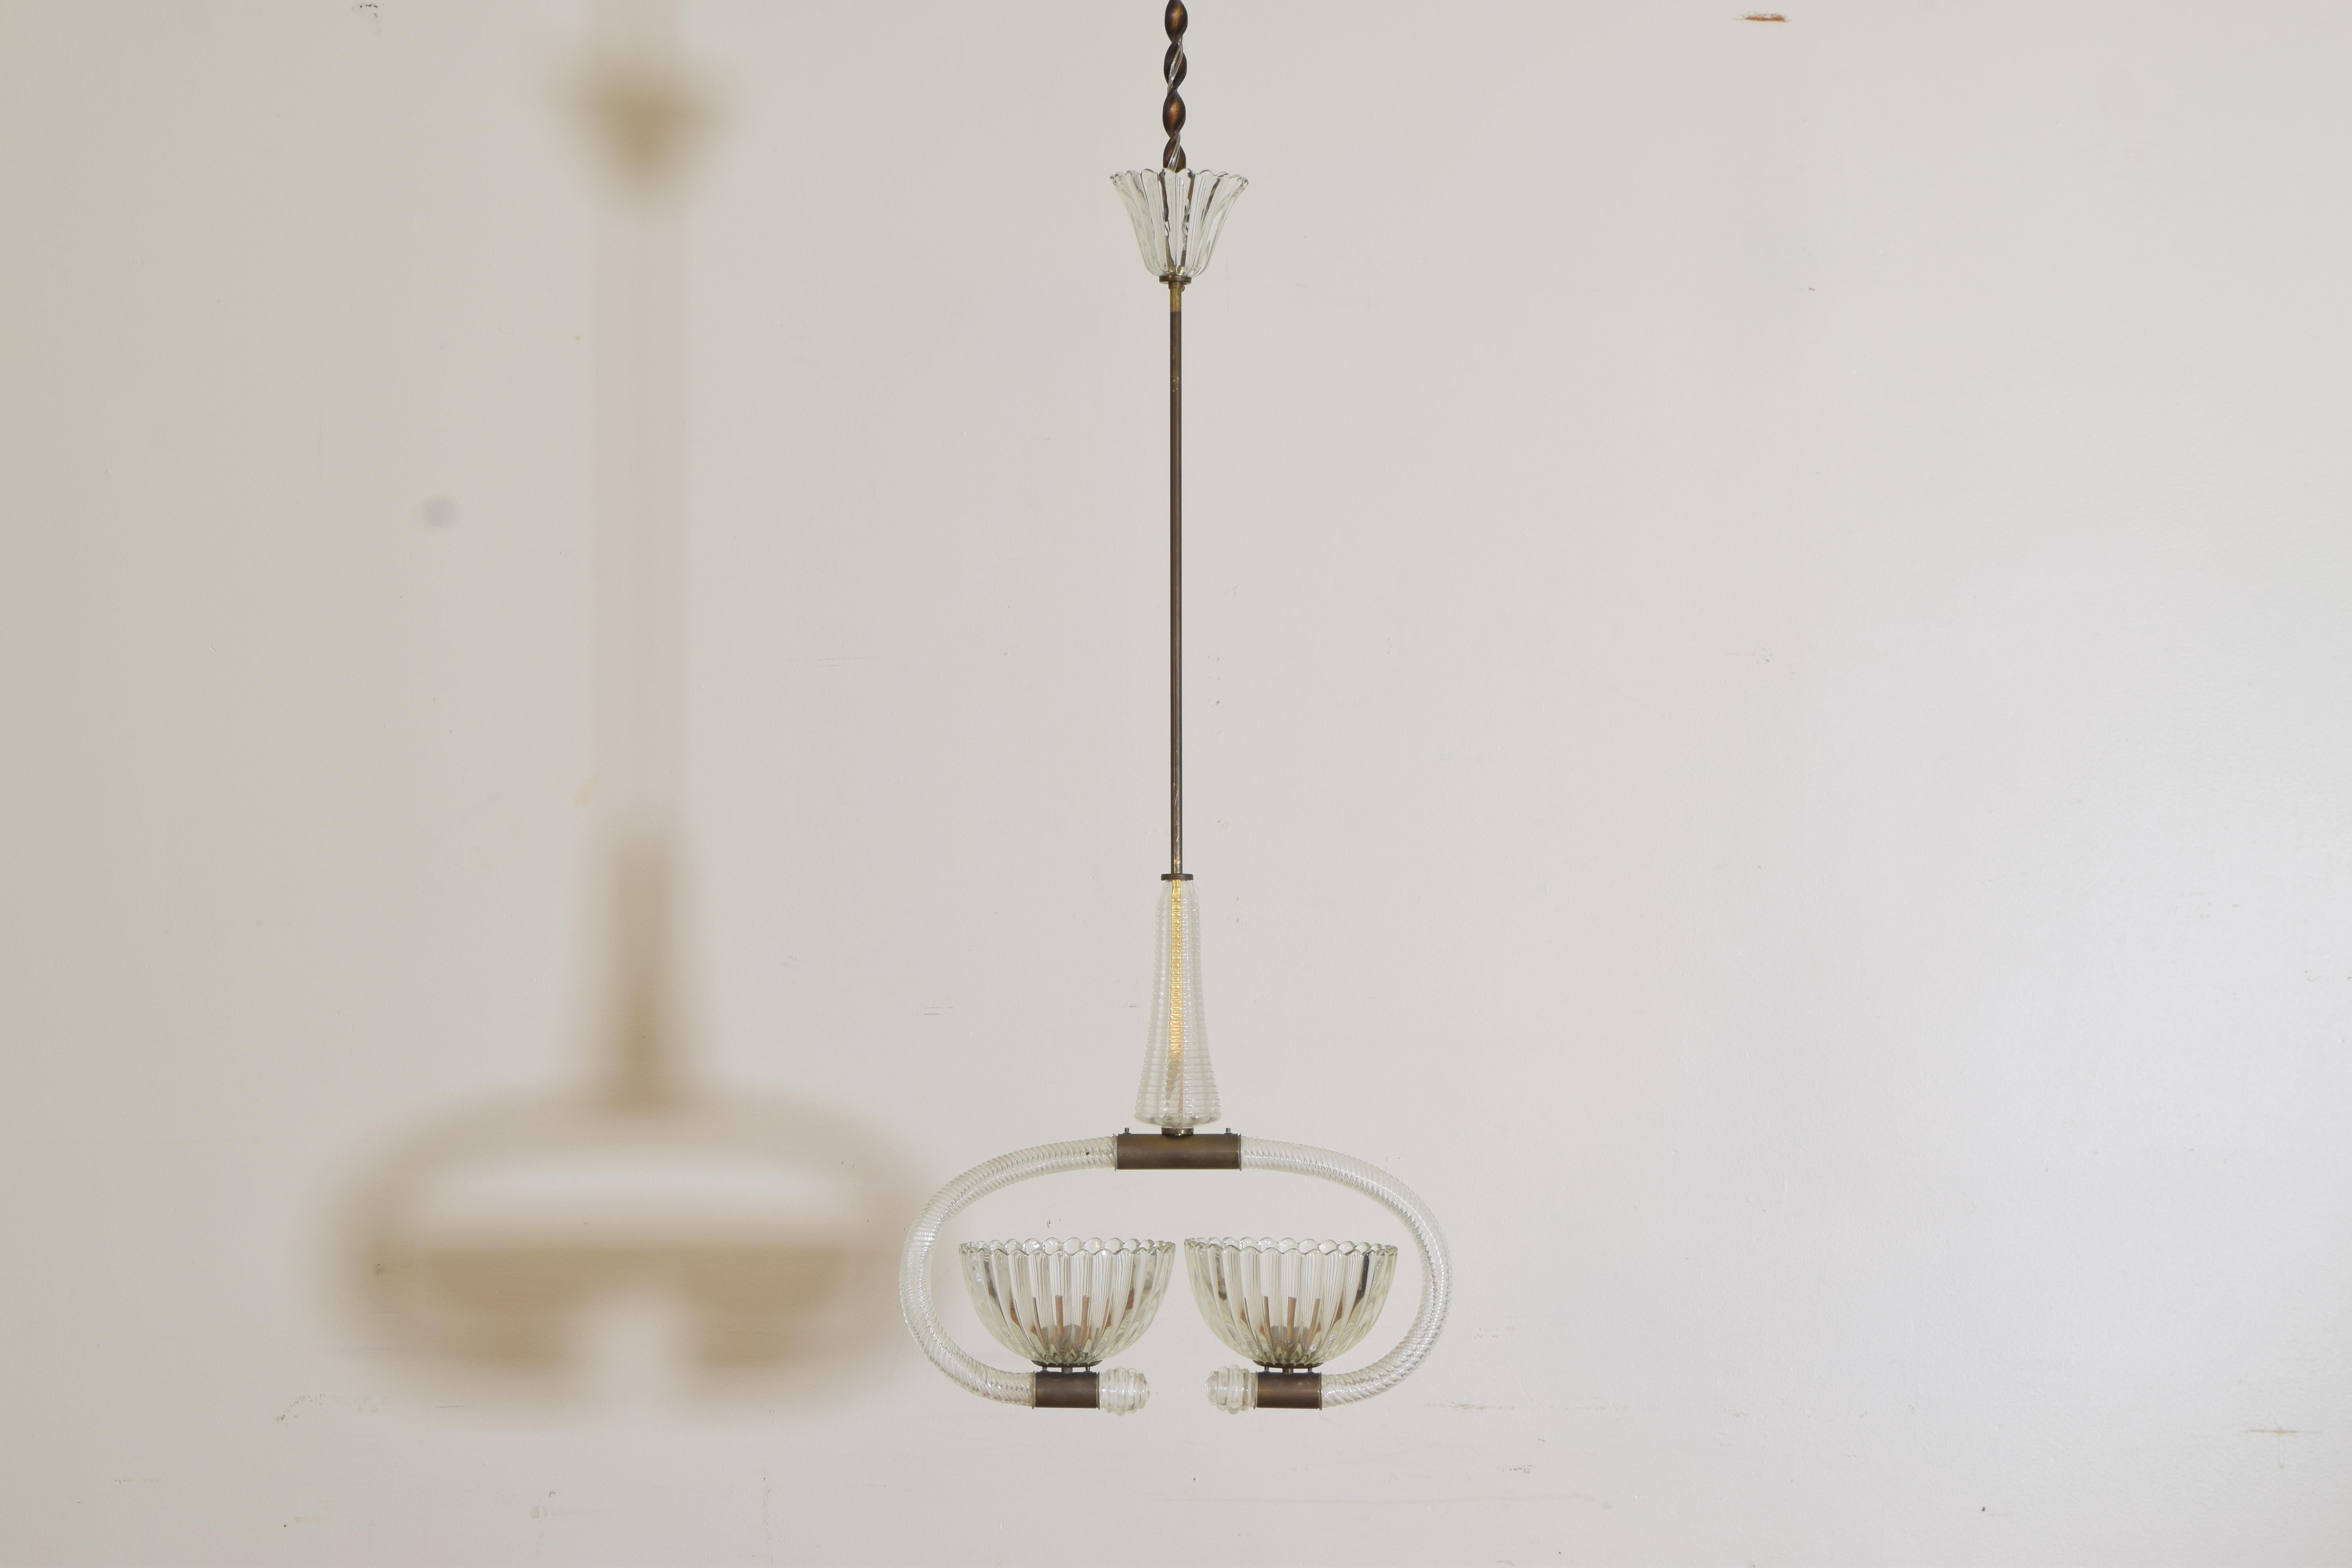 suspended from its original glass canopy and brass rod this fixture features two large glass bobeches within and under elliptically shaped arms, all fittings are in brass, internally wired 